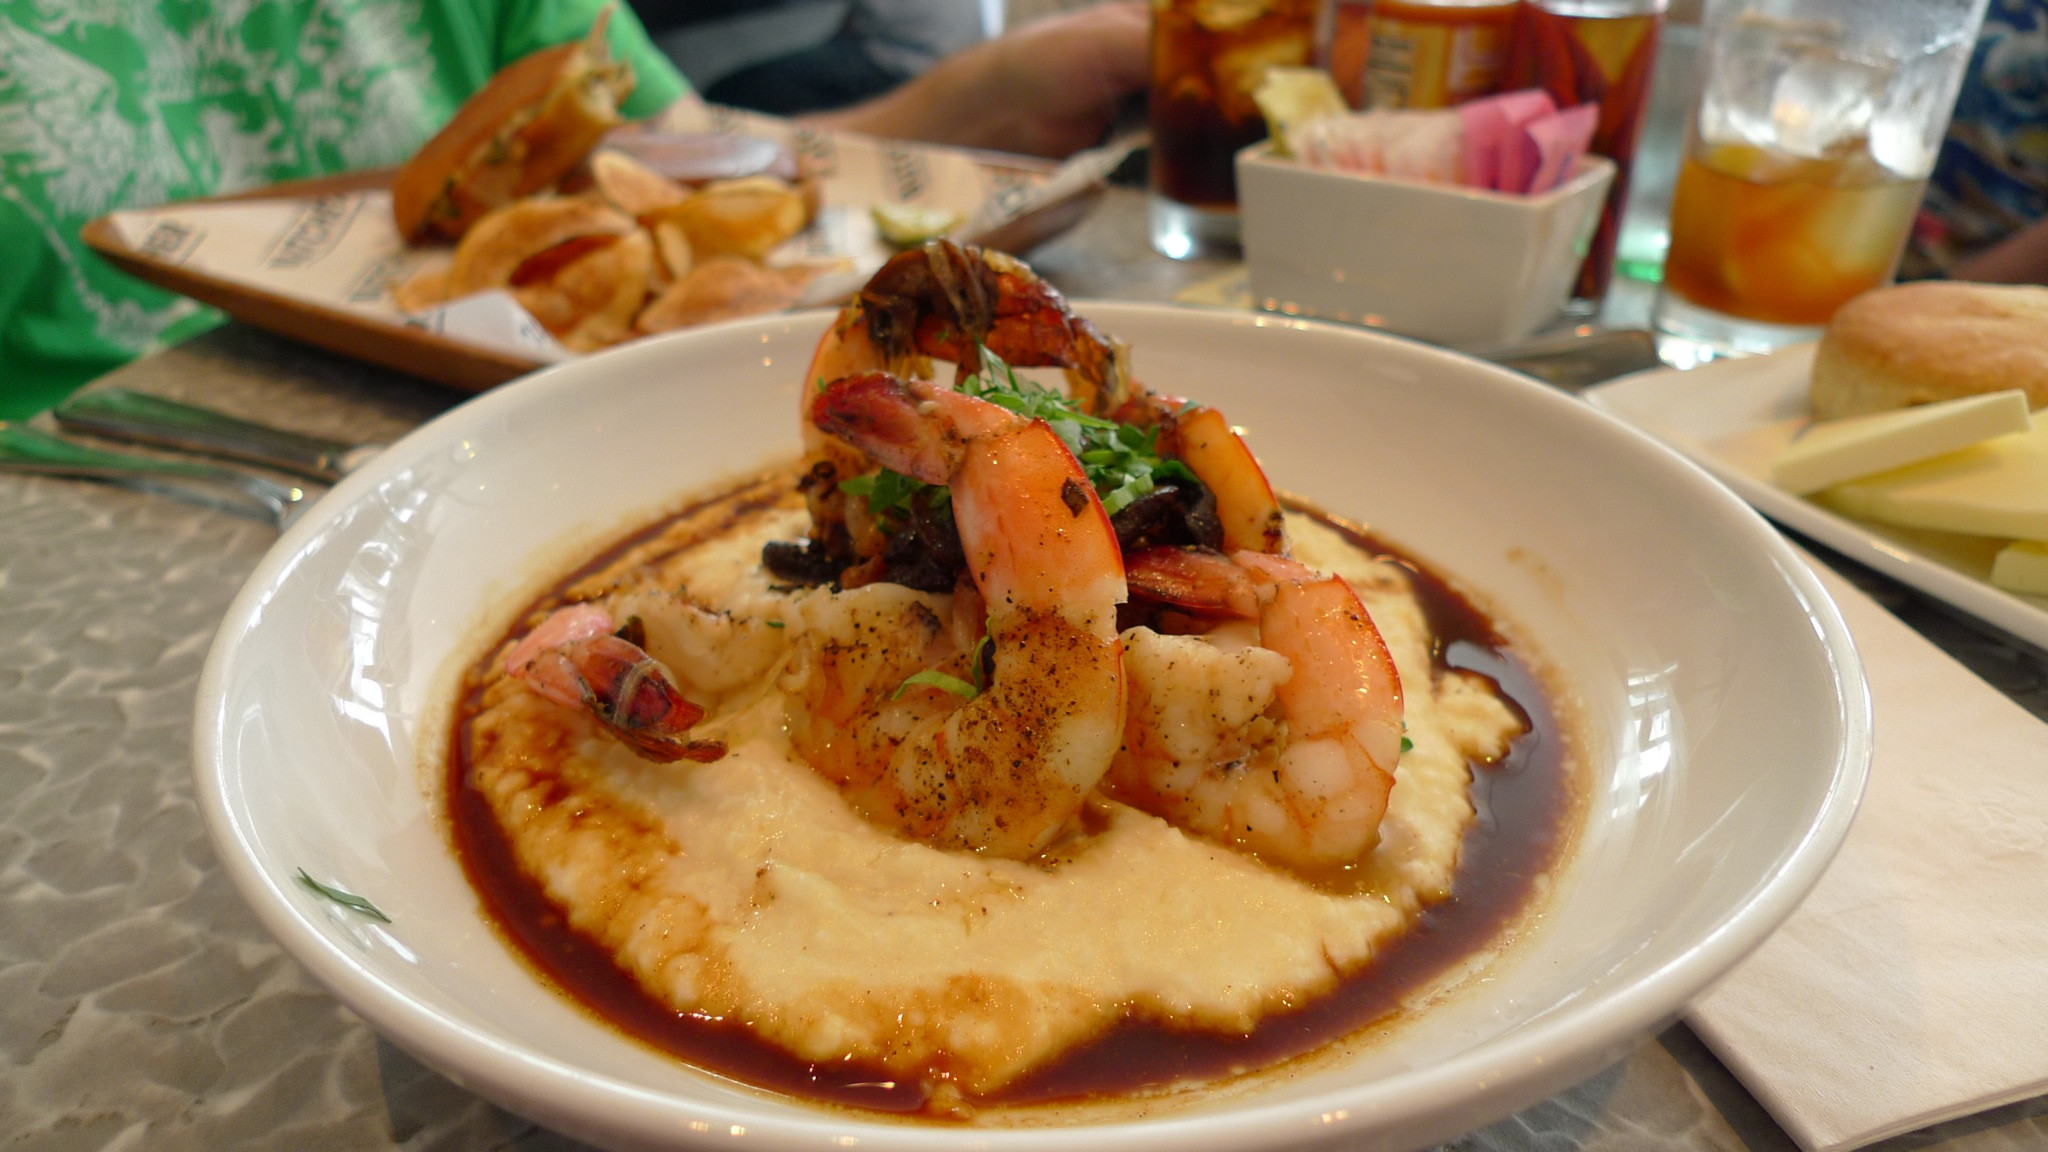 Best Ever Shrimp And Grits
 File Probably the best shrimp & grits I ve ever had ever